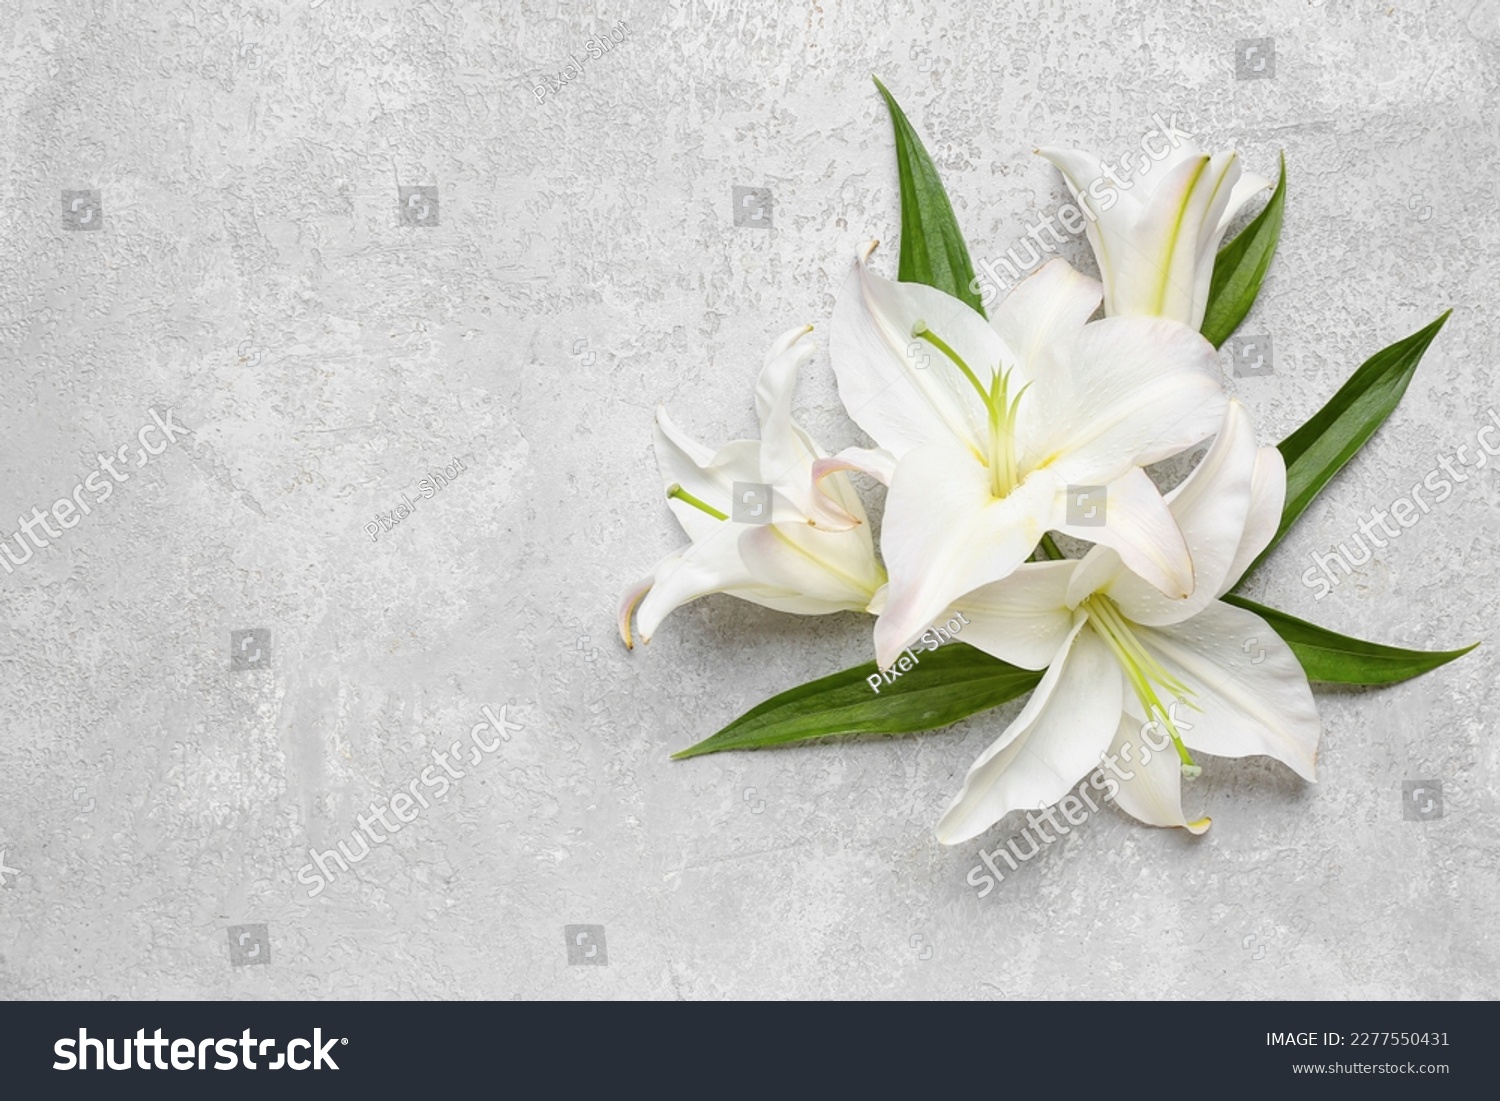 White lily flowers on light background #2277550431